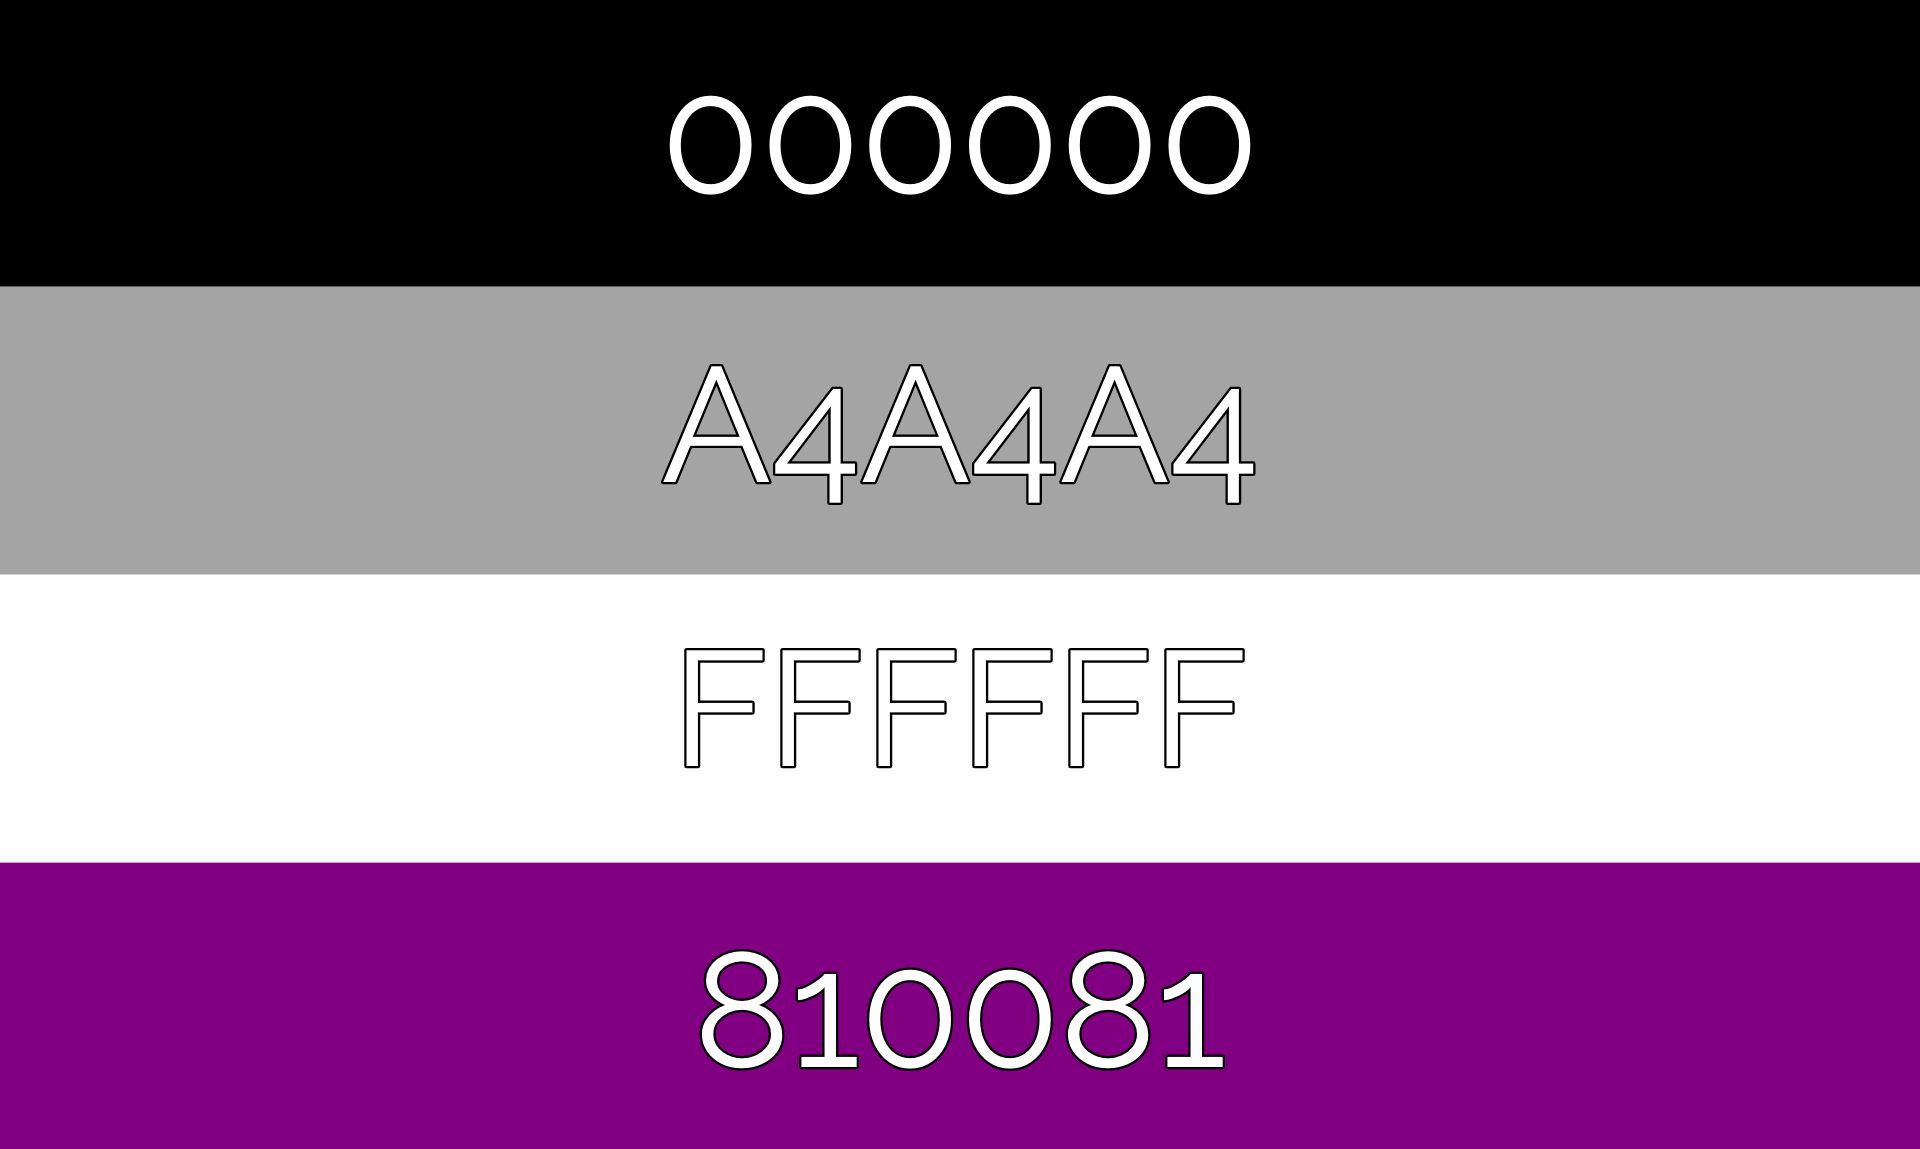 Official Pride Colors 2022 Exact Color Codes For 15 Pride Flags